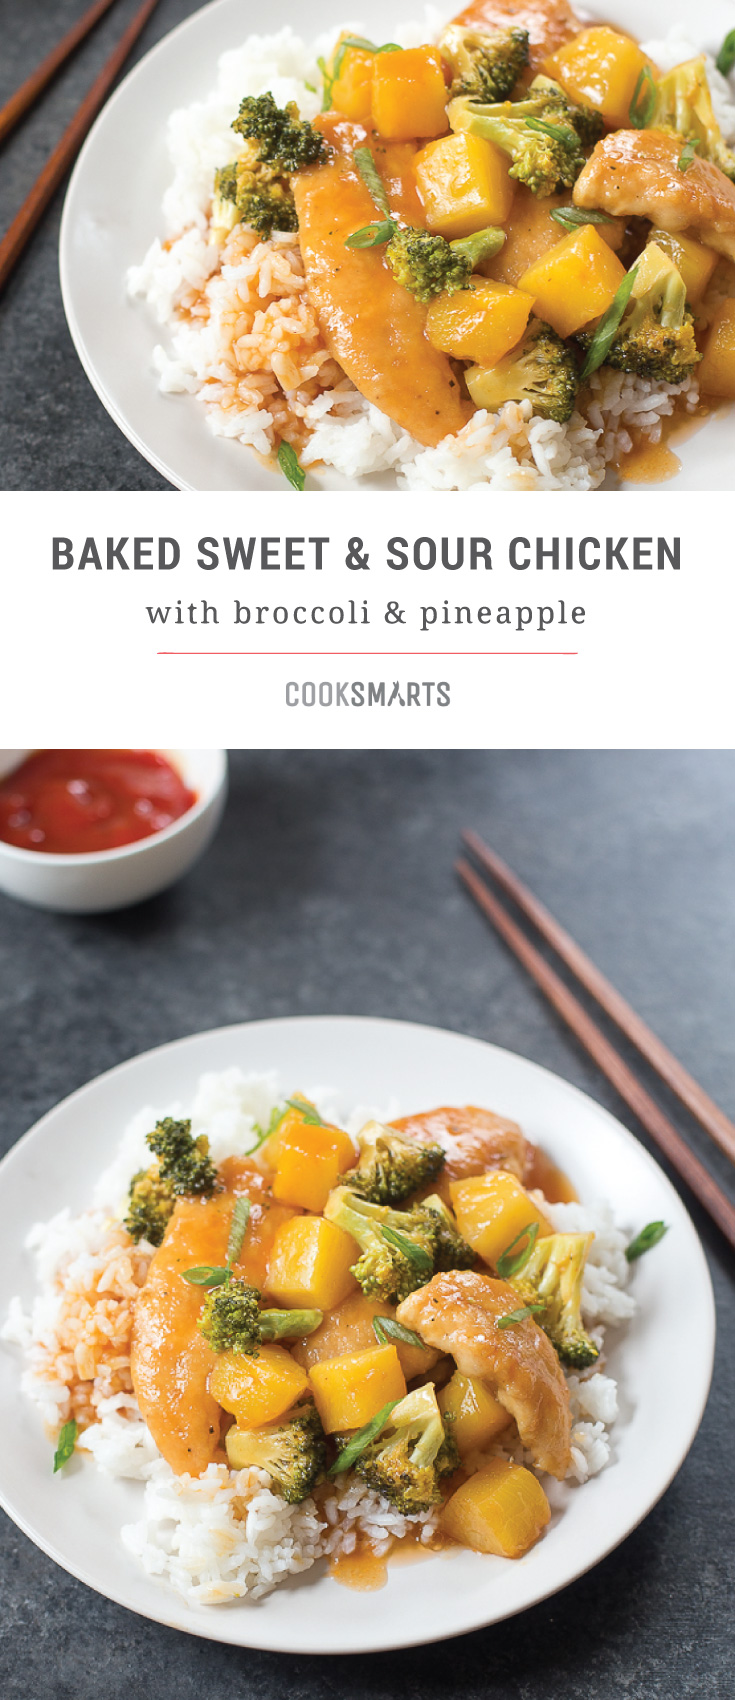 Weeknight Recipe: Baked Sweet and Sour Chicken via @cooksmarts